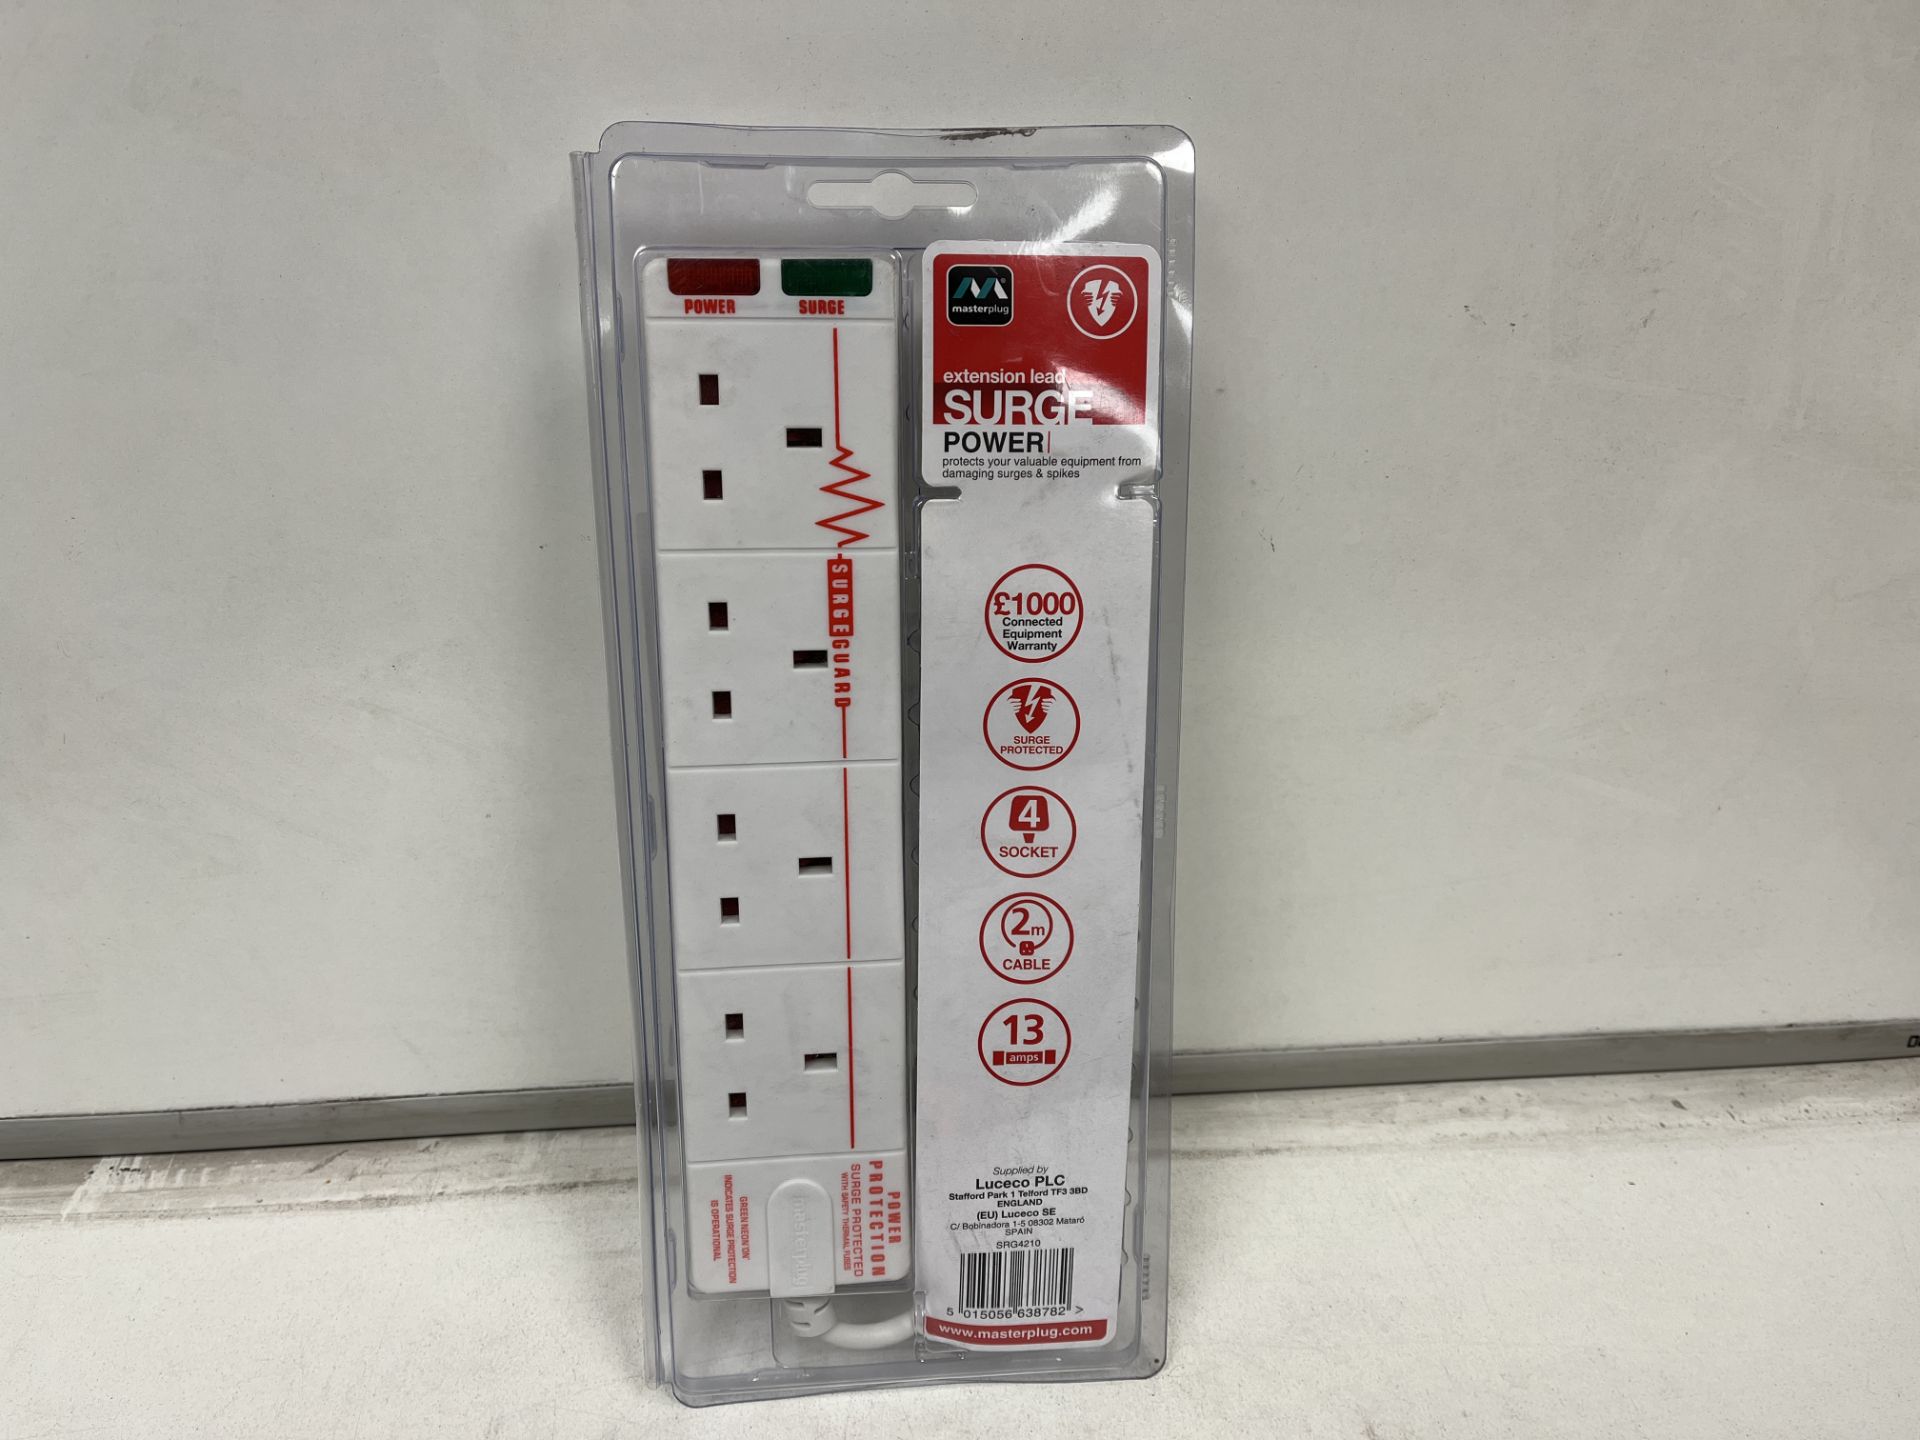 8 X NEW PACKAGED MASTERPLUG SURGE POWER EXTENSION LEAD. 4 SOCKET. 2M CABLE. 13 AMPS. ROW 15.12 RACK